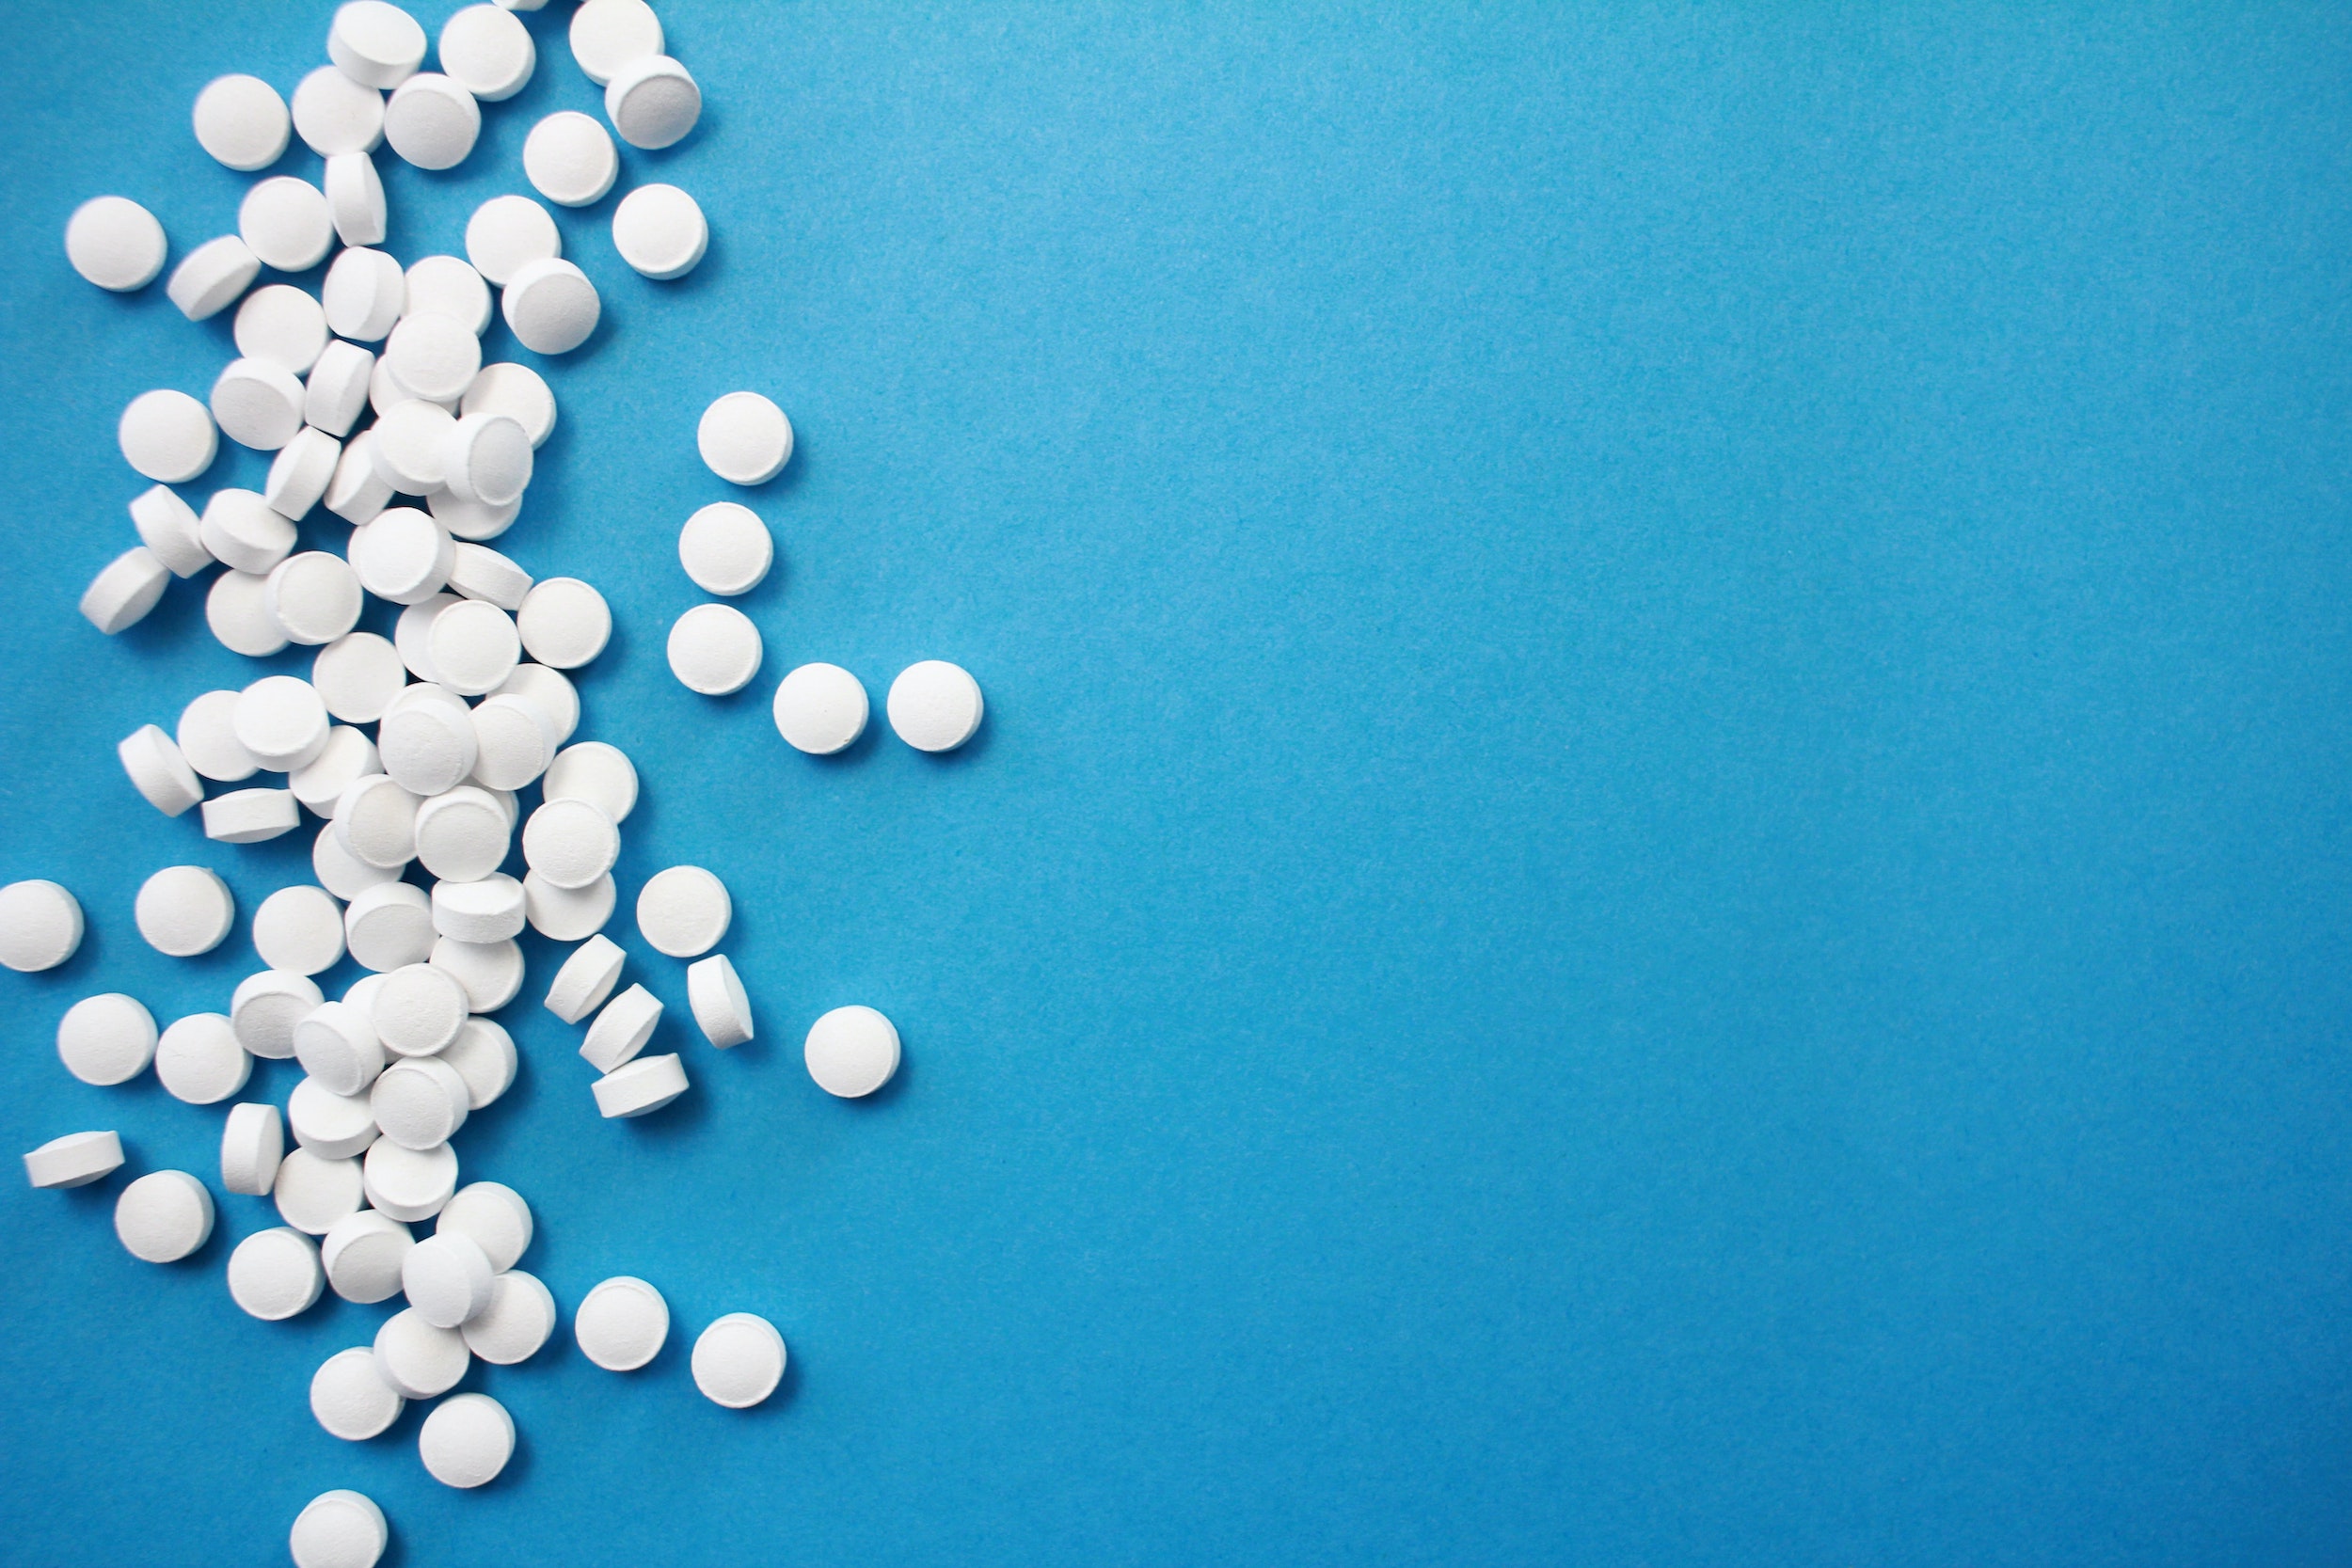 How a Proposed Change in Drug Pricing Would Affect A Value-Based Model